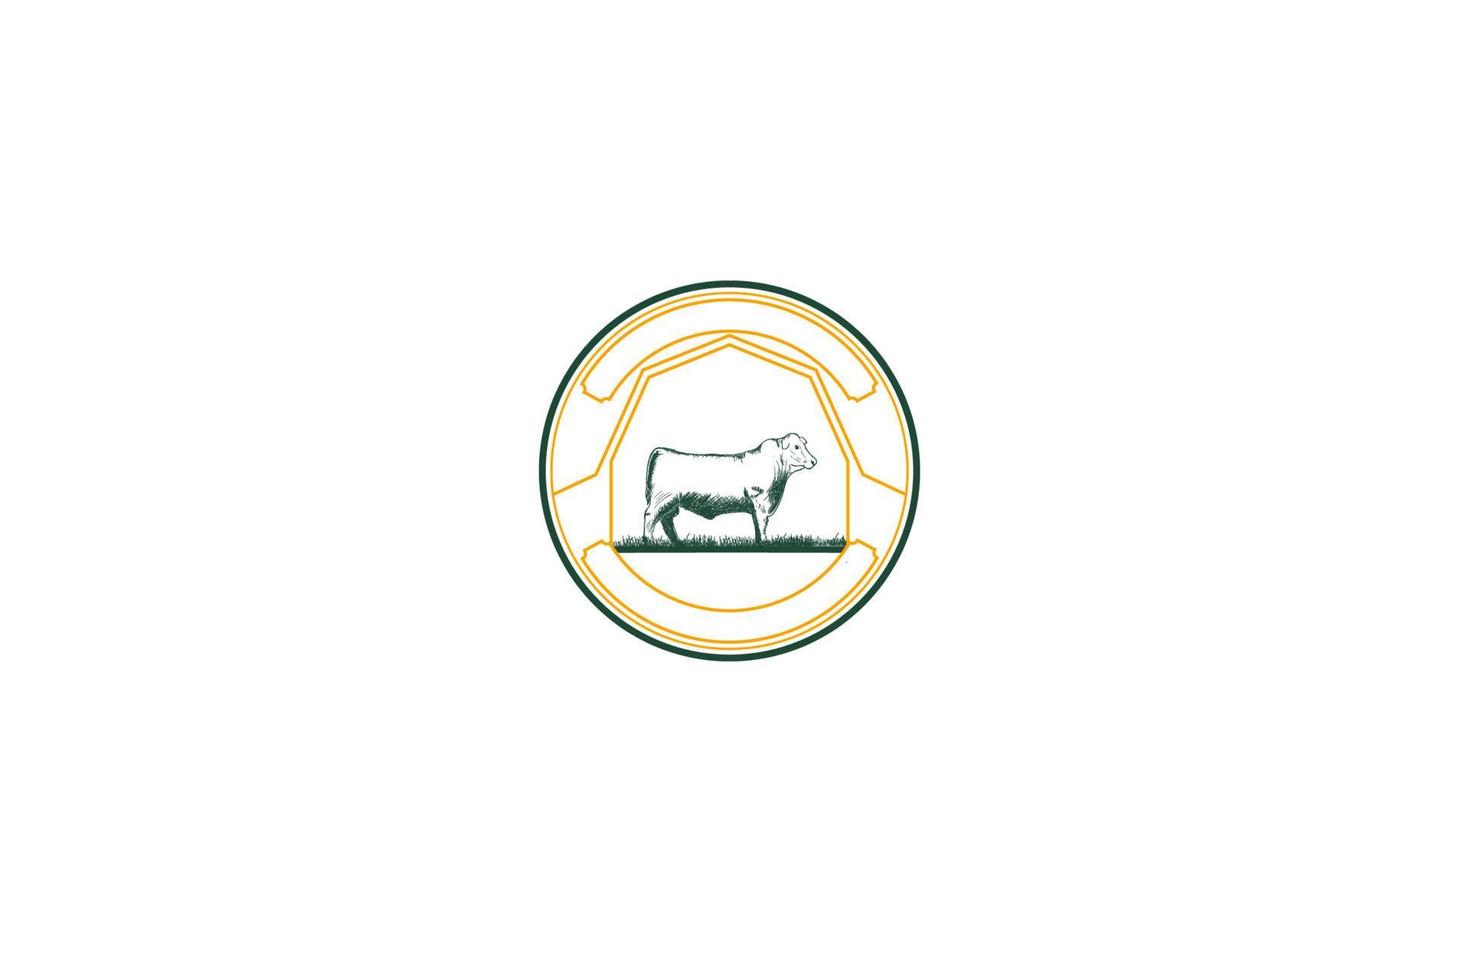 Vintage Retro Angus Cattle for Beef Logo Design Vector